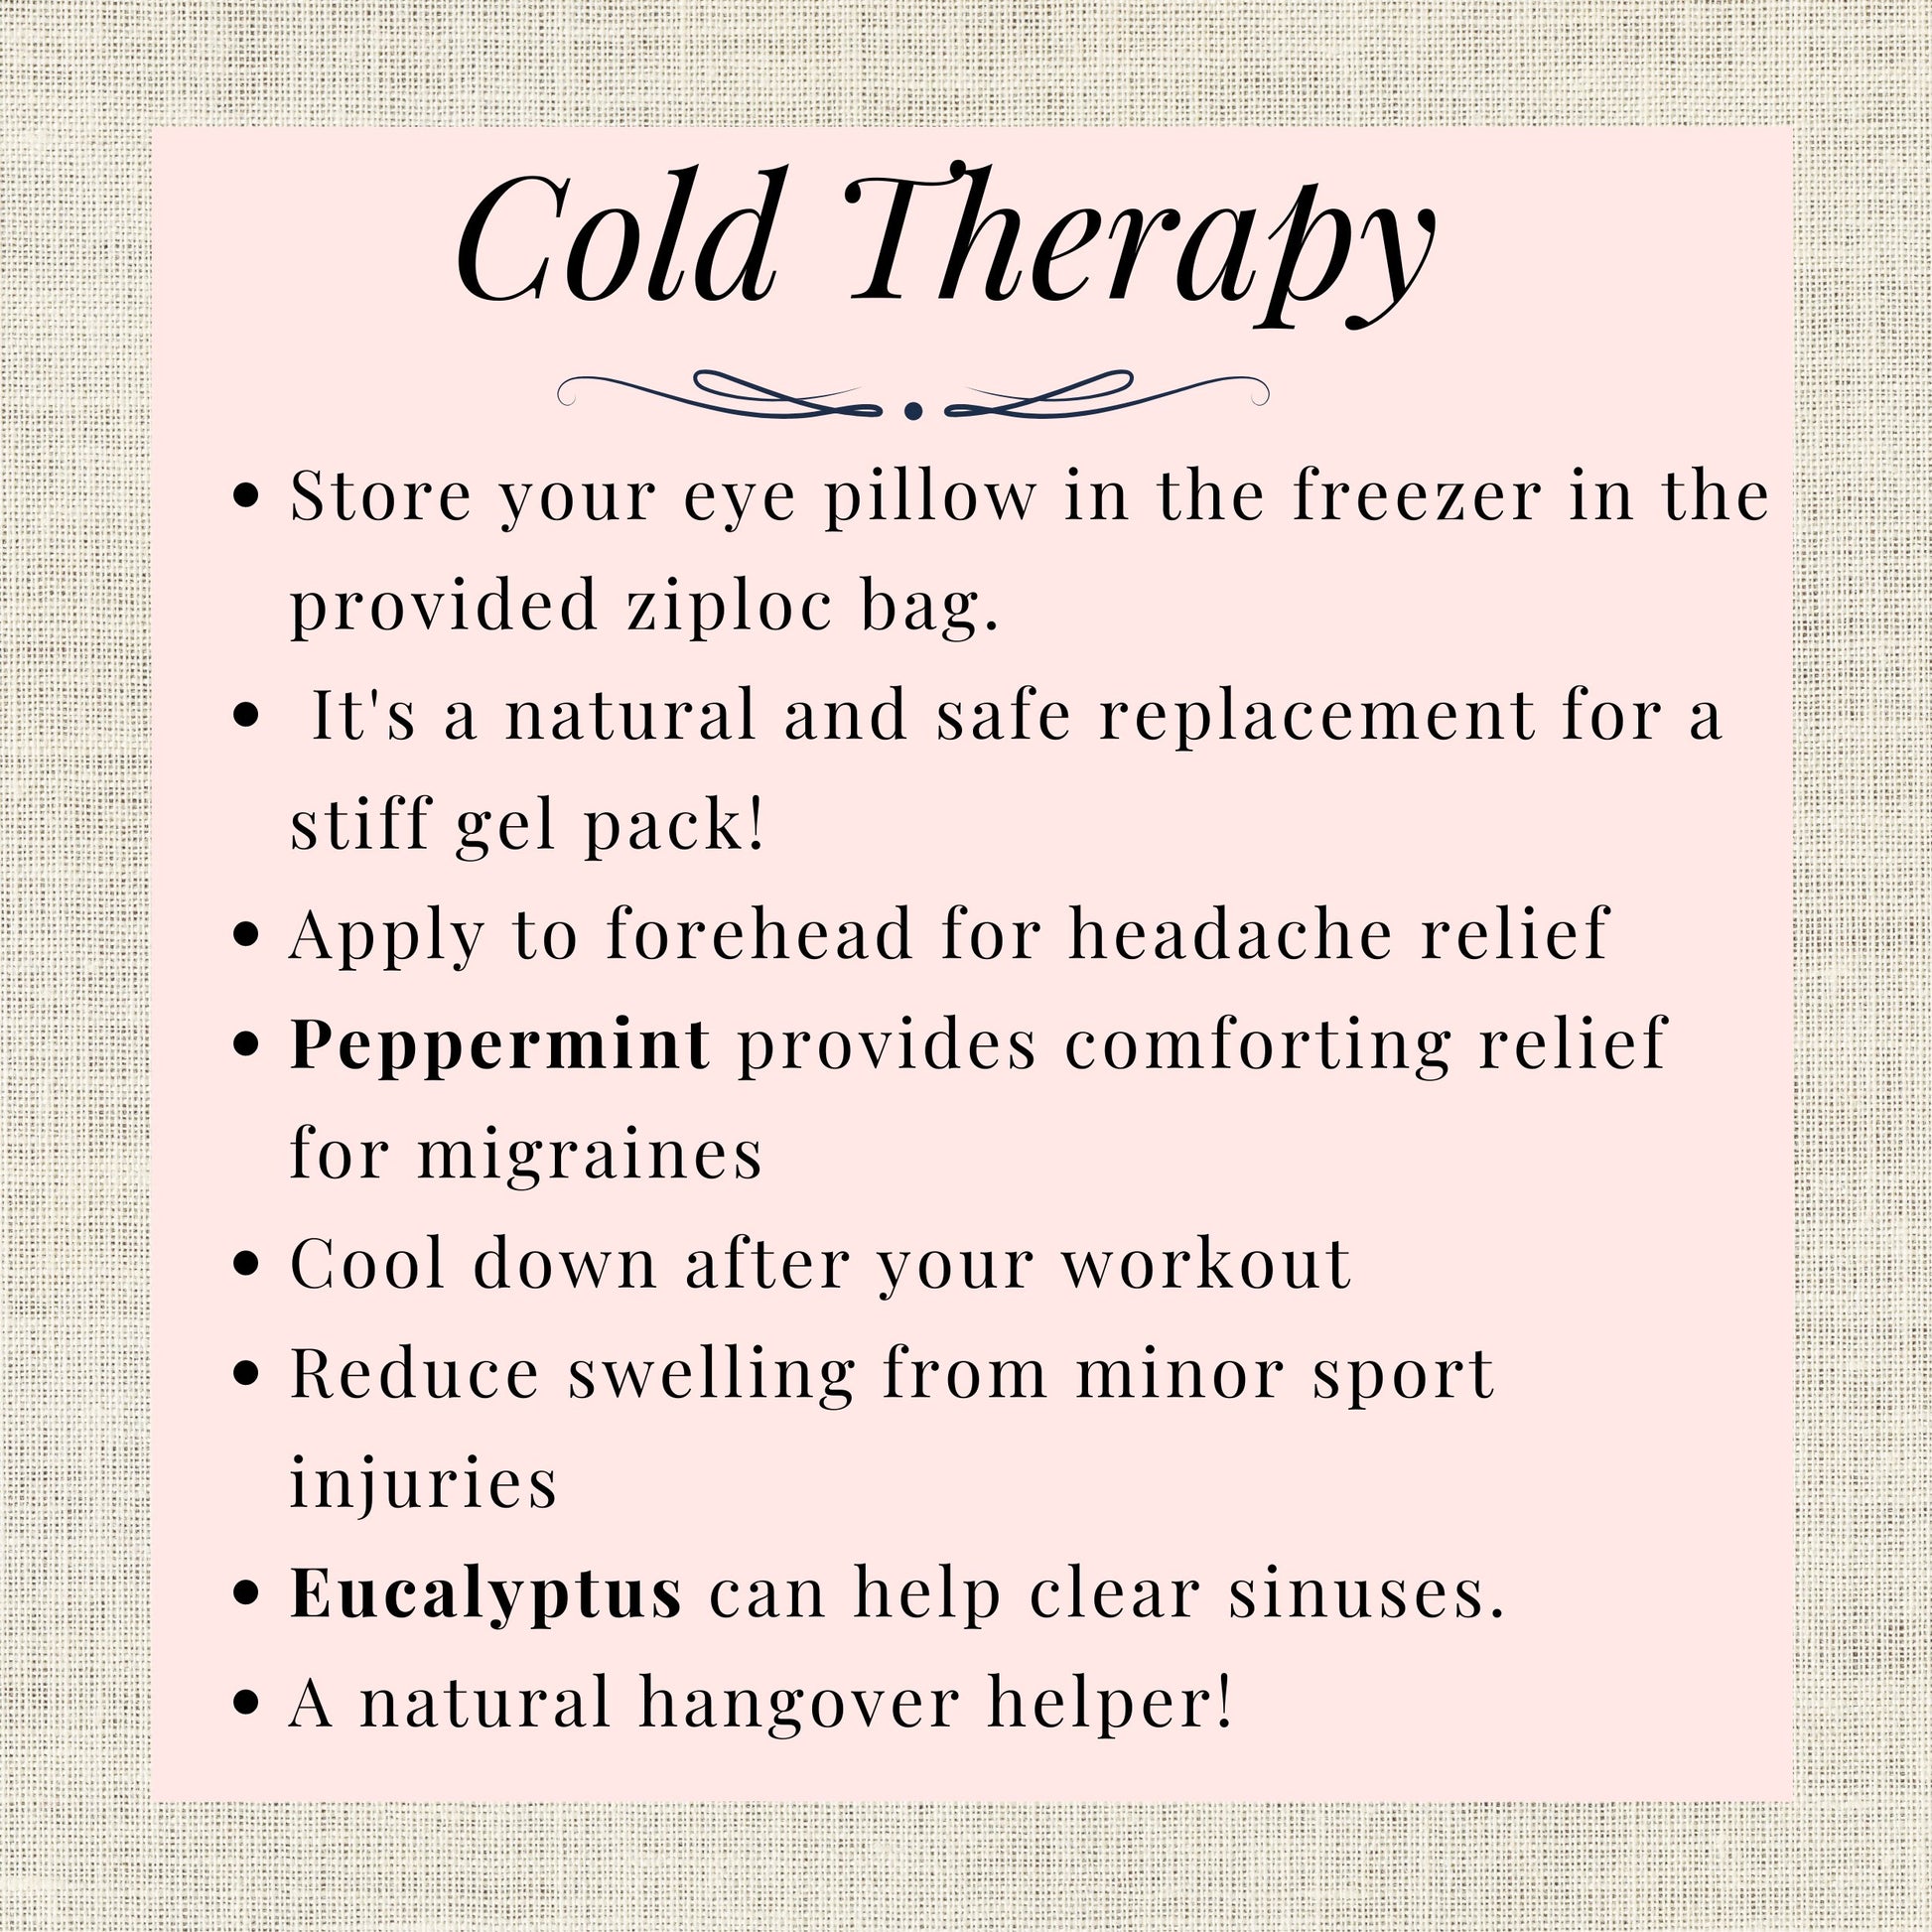 how to use eye pillow as cold therapy infographic